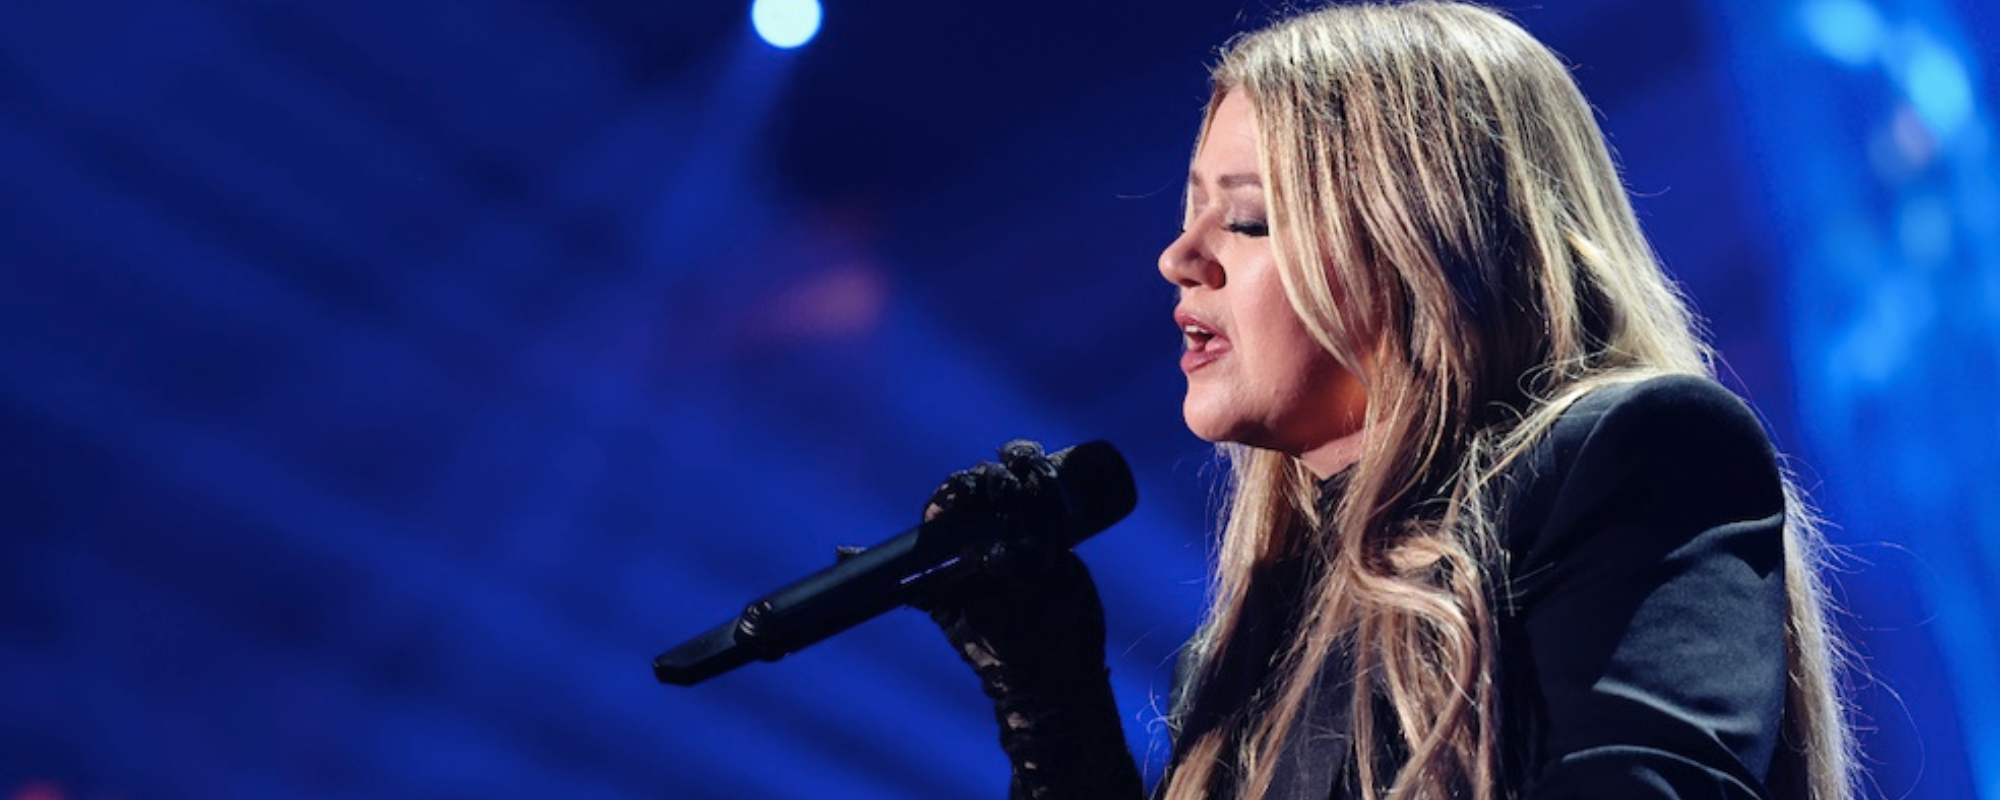 Watch: Kelly Clarkson Performs Madonna’s “Lucky Star” On Kellyoke